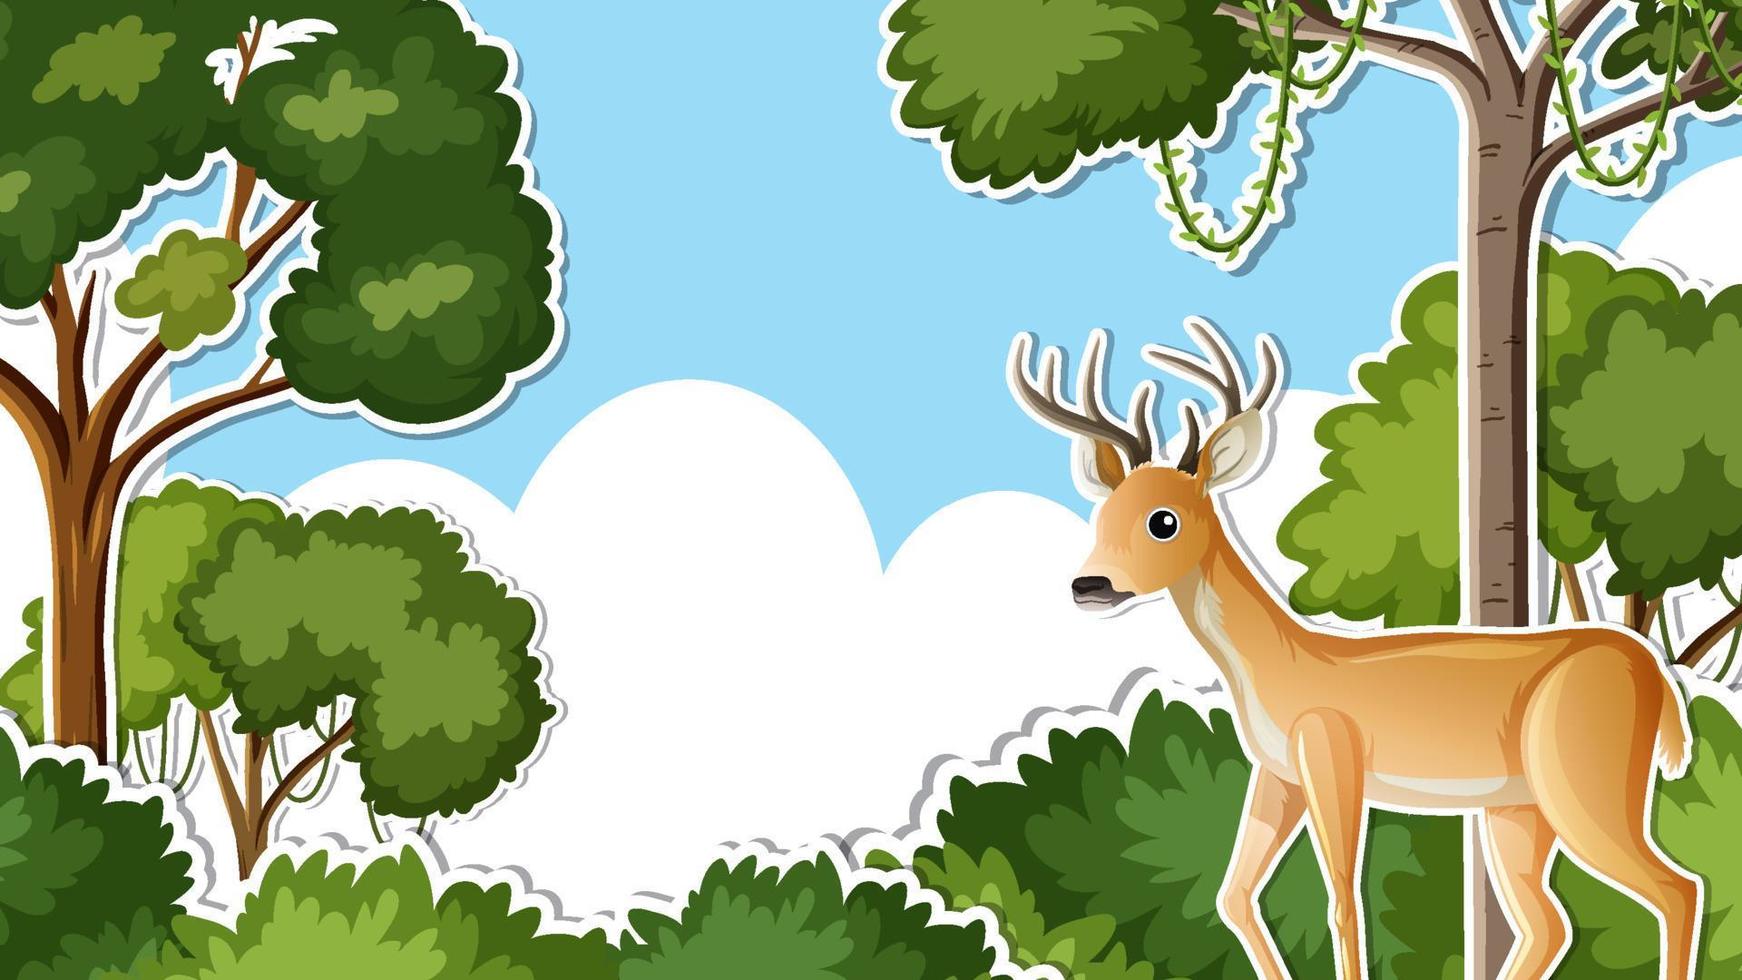 Thumbnail design with deer in the forest vector